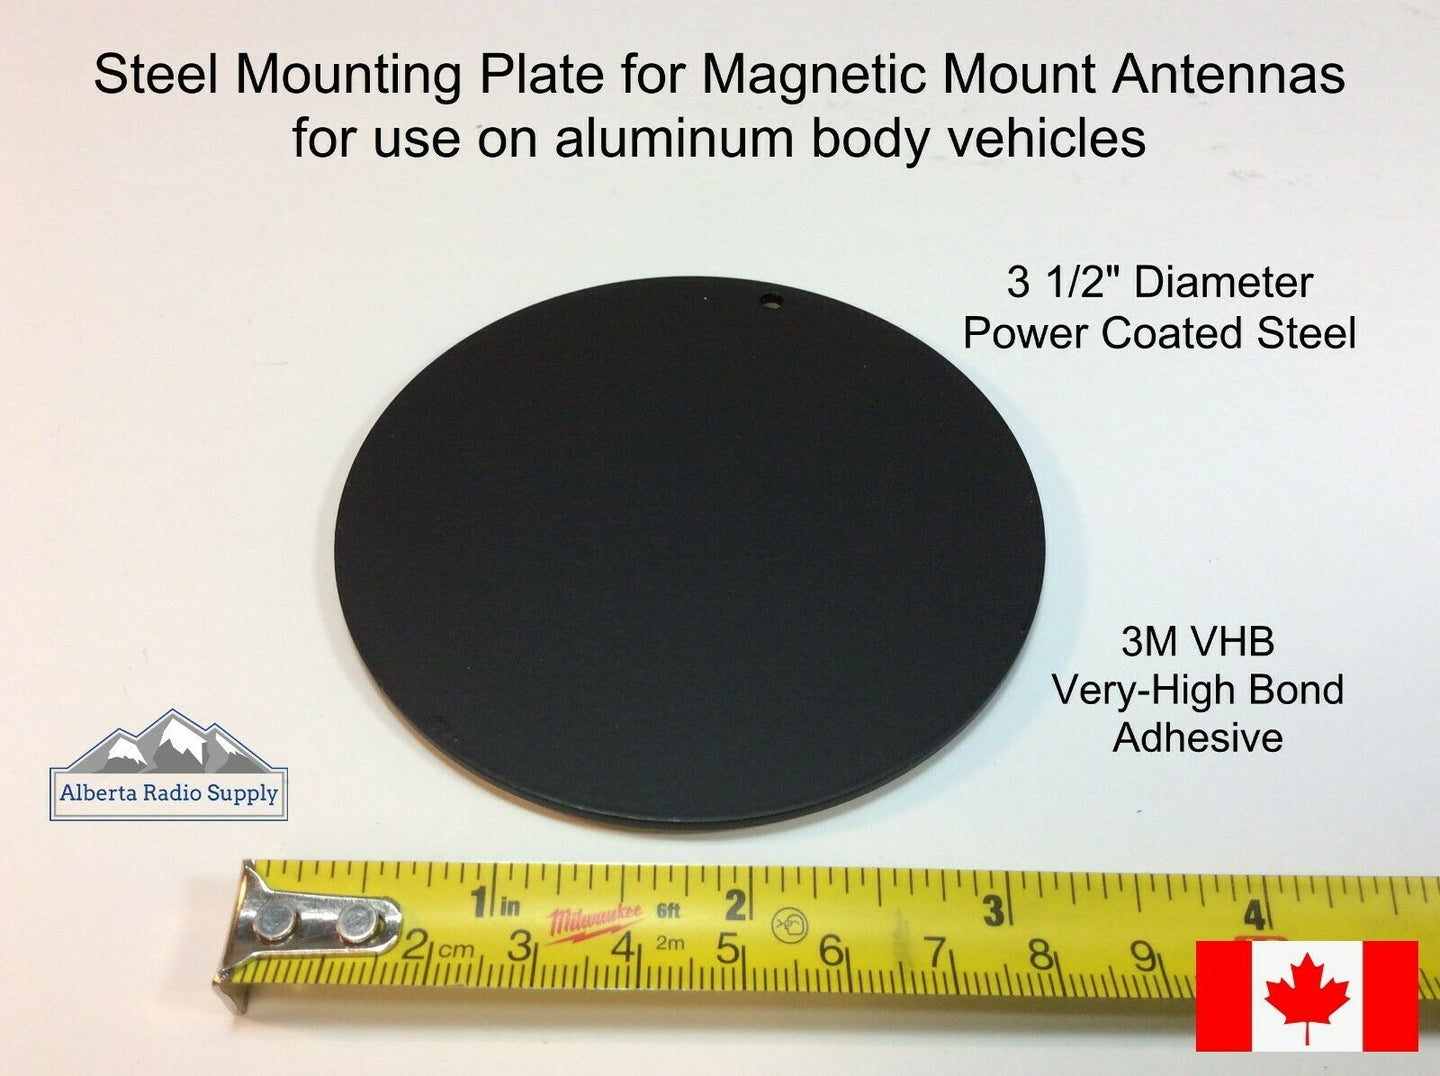 Adhesive Mounting Plate for Aluminum Roofs - Magnetic Mounts  F150